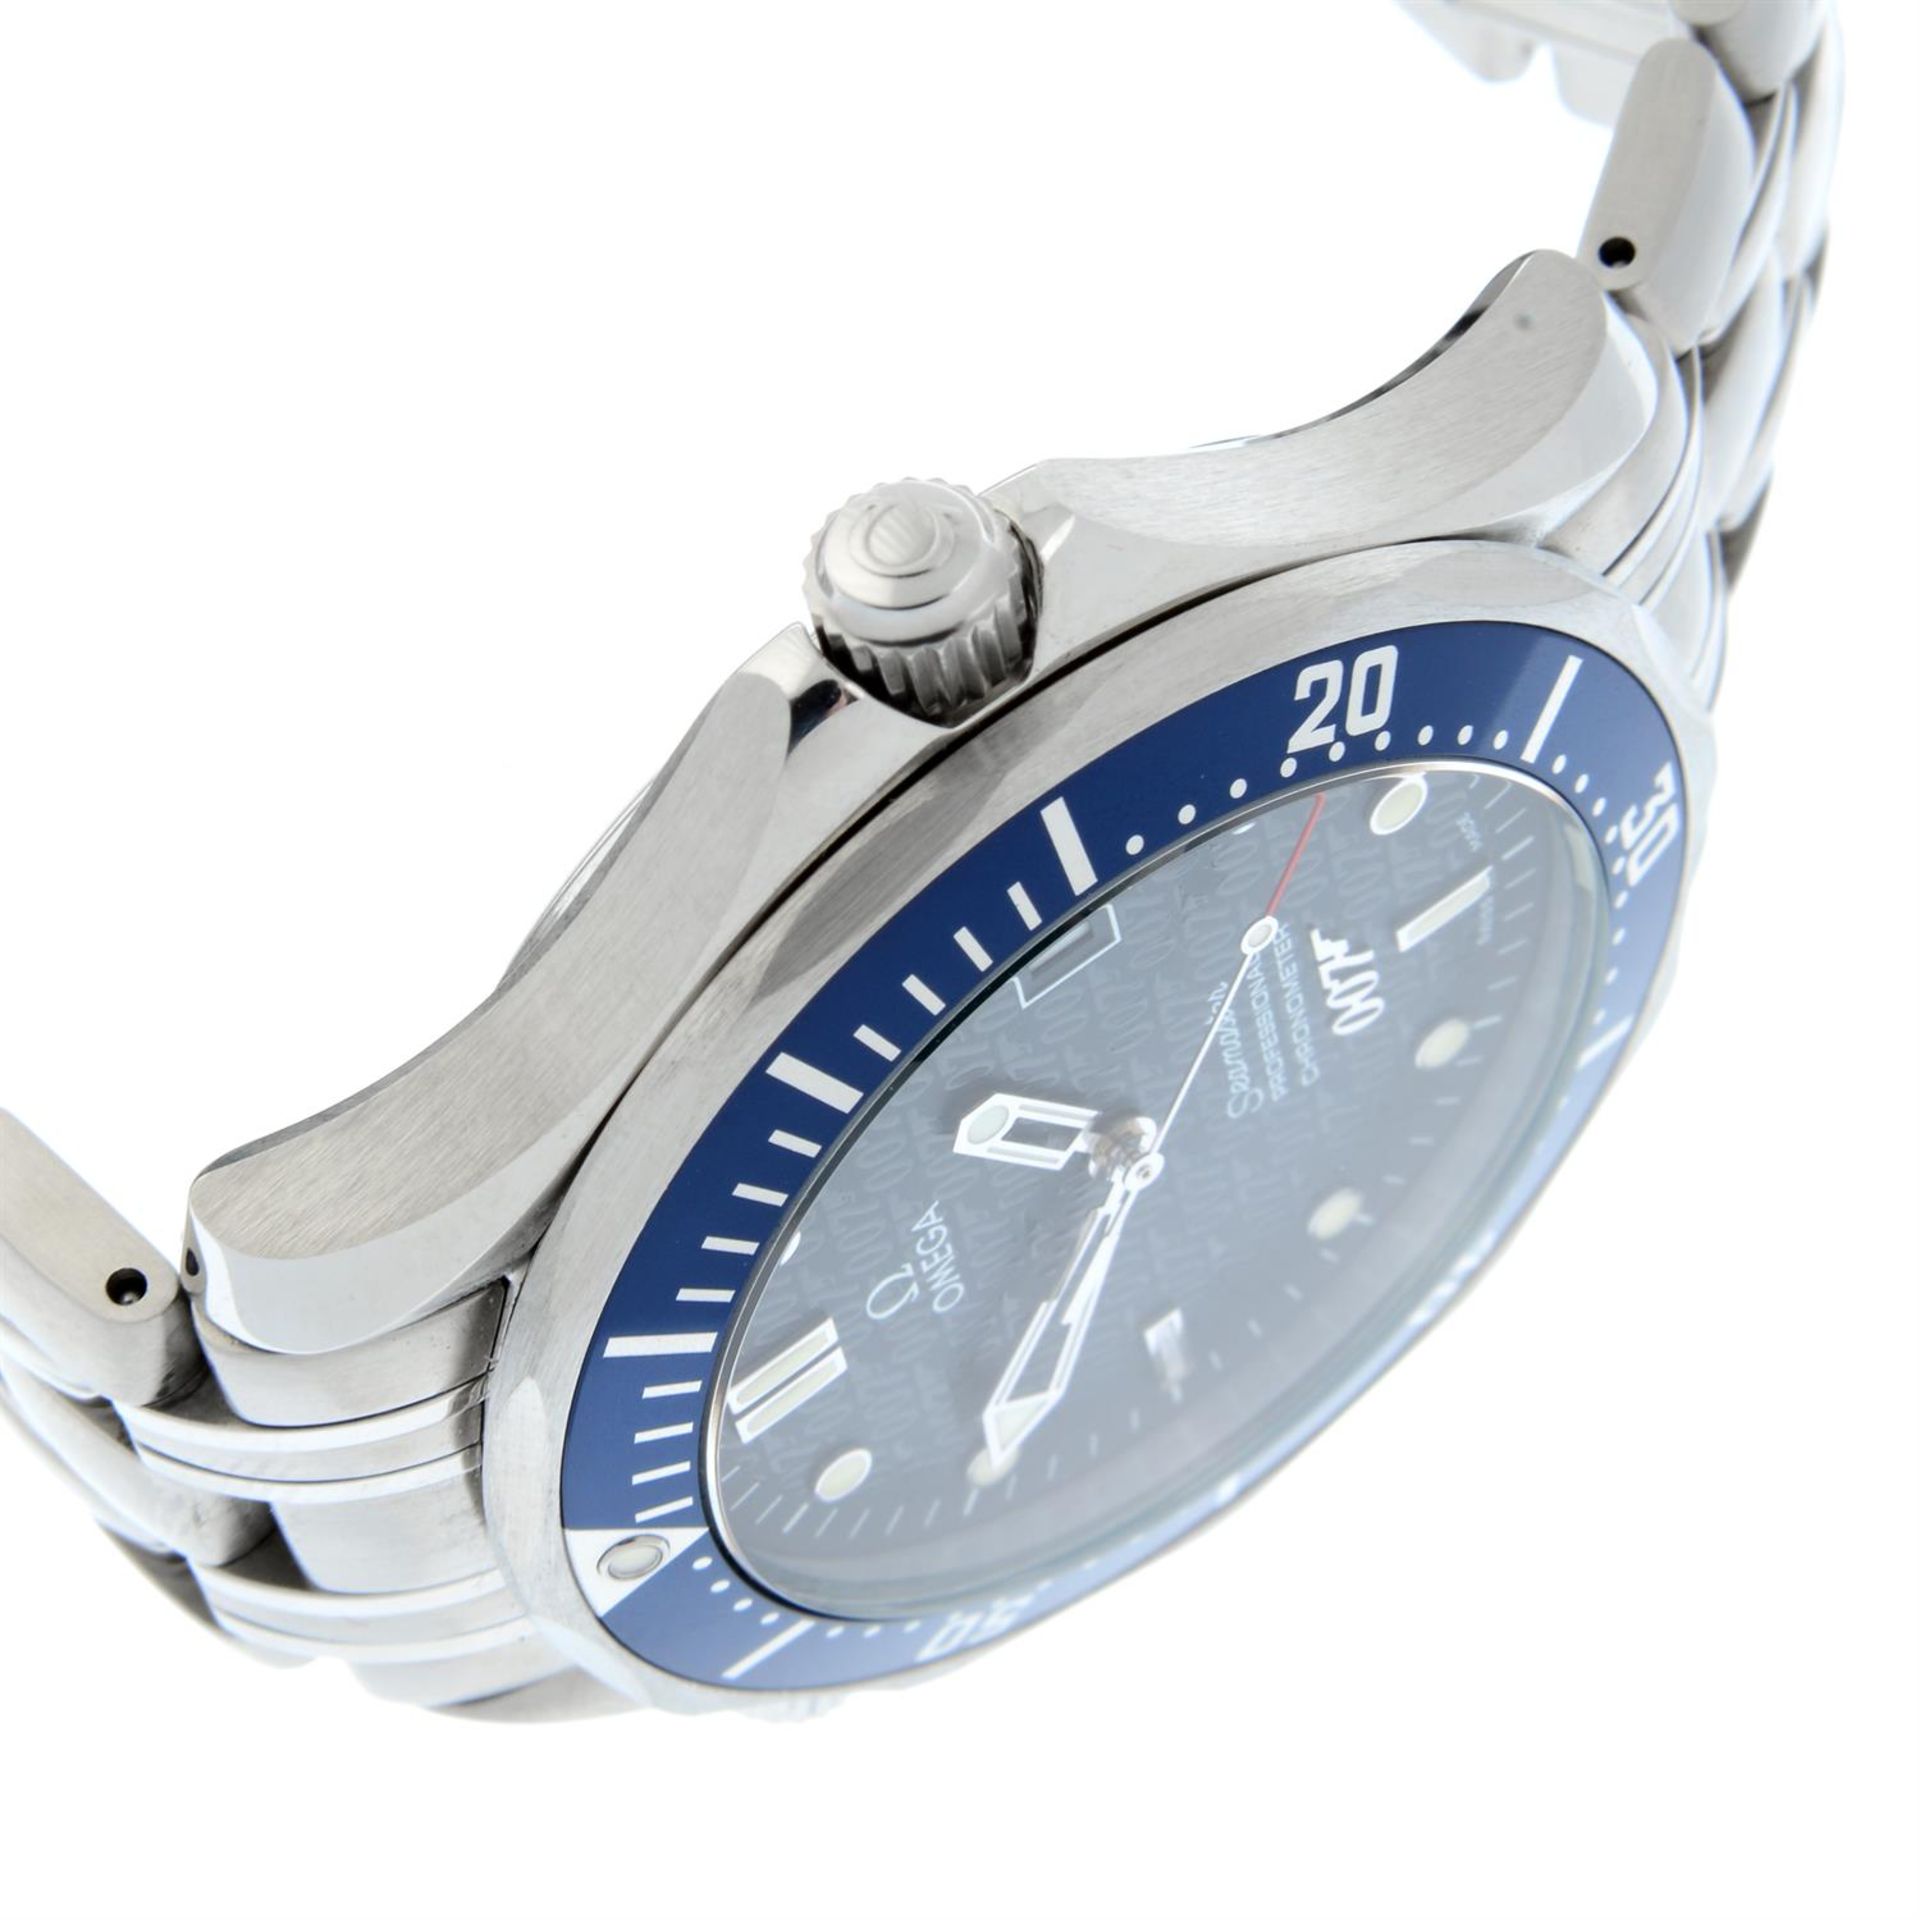 OMEGA - a limited edition stainless steel Seamaster 007 bracelet watch, 41mm. - Image 3 of 7